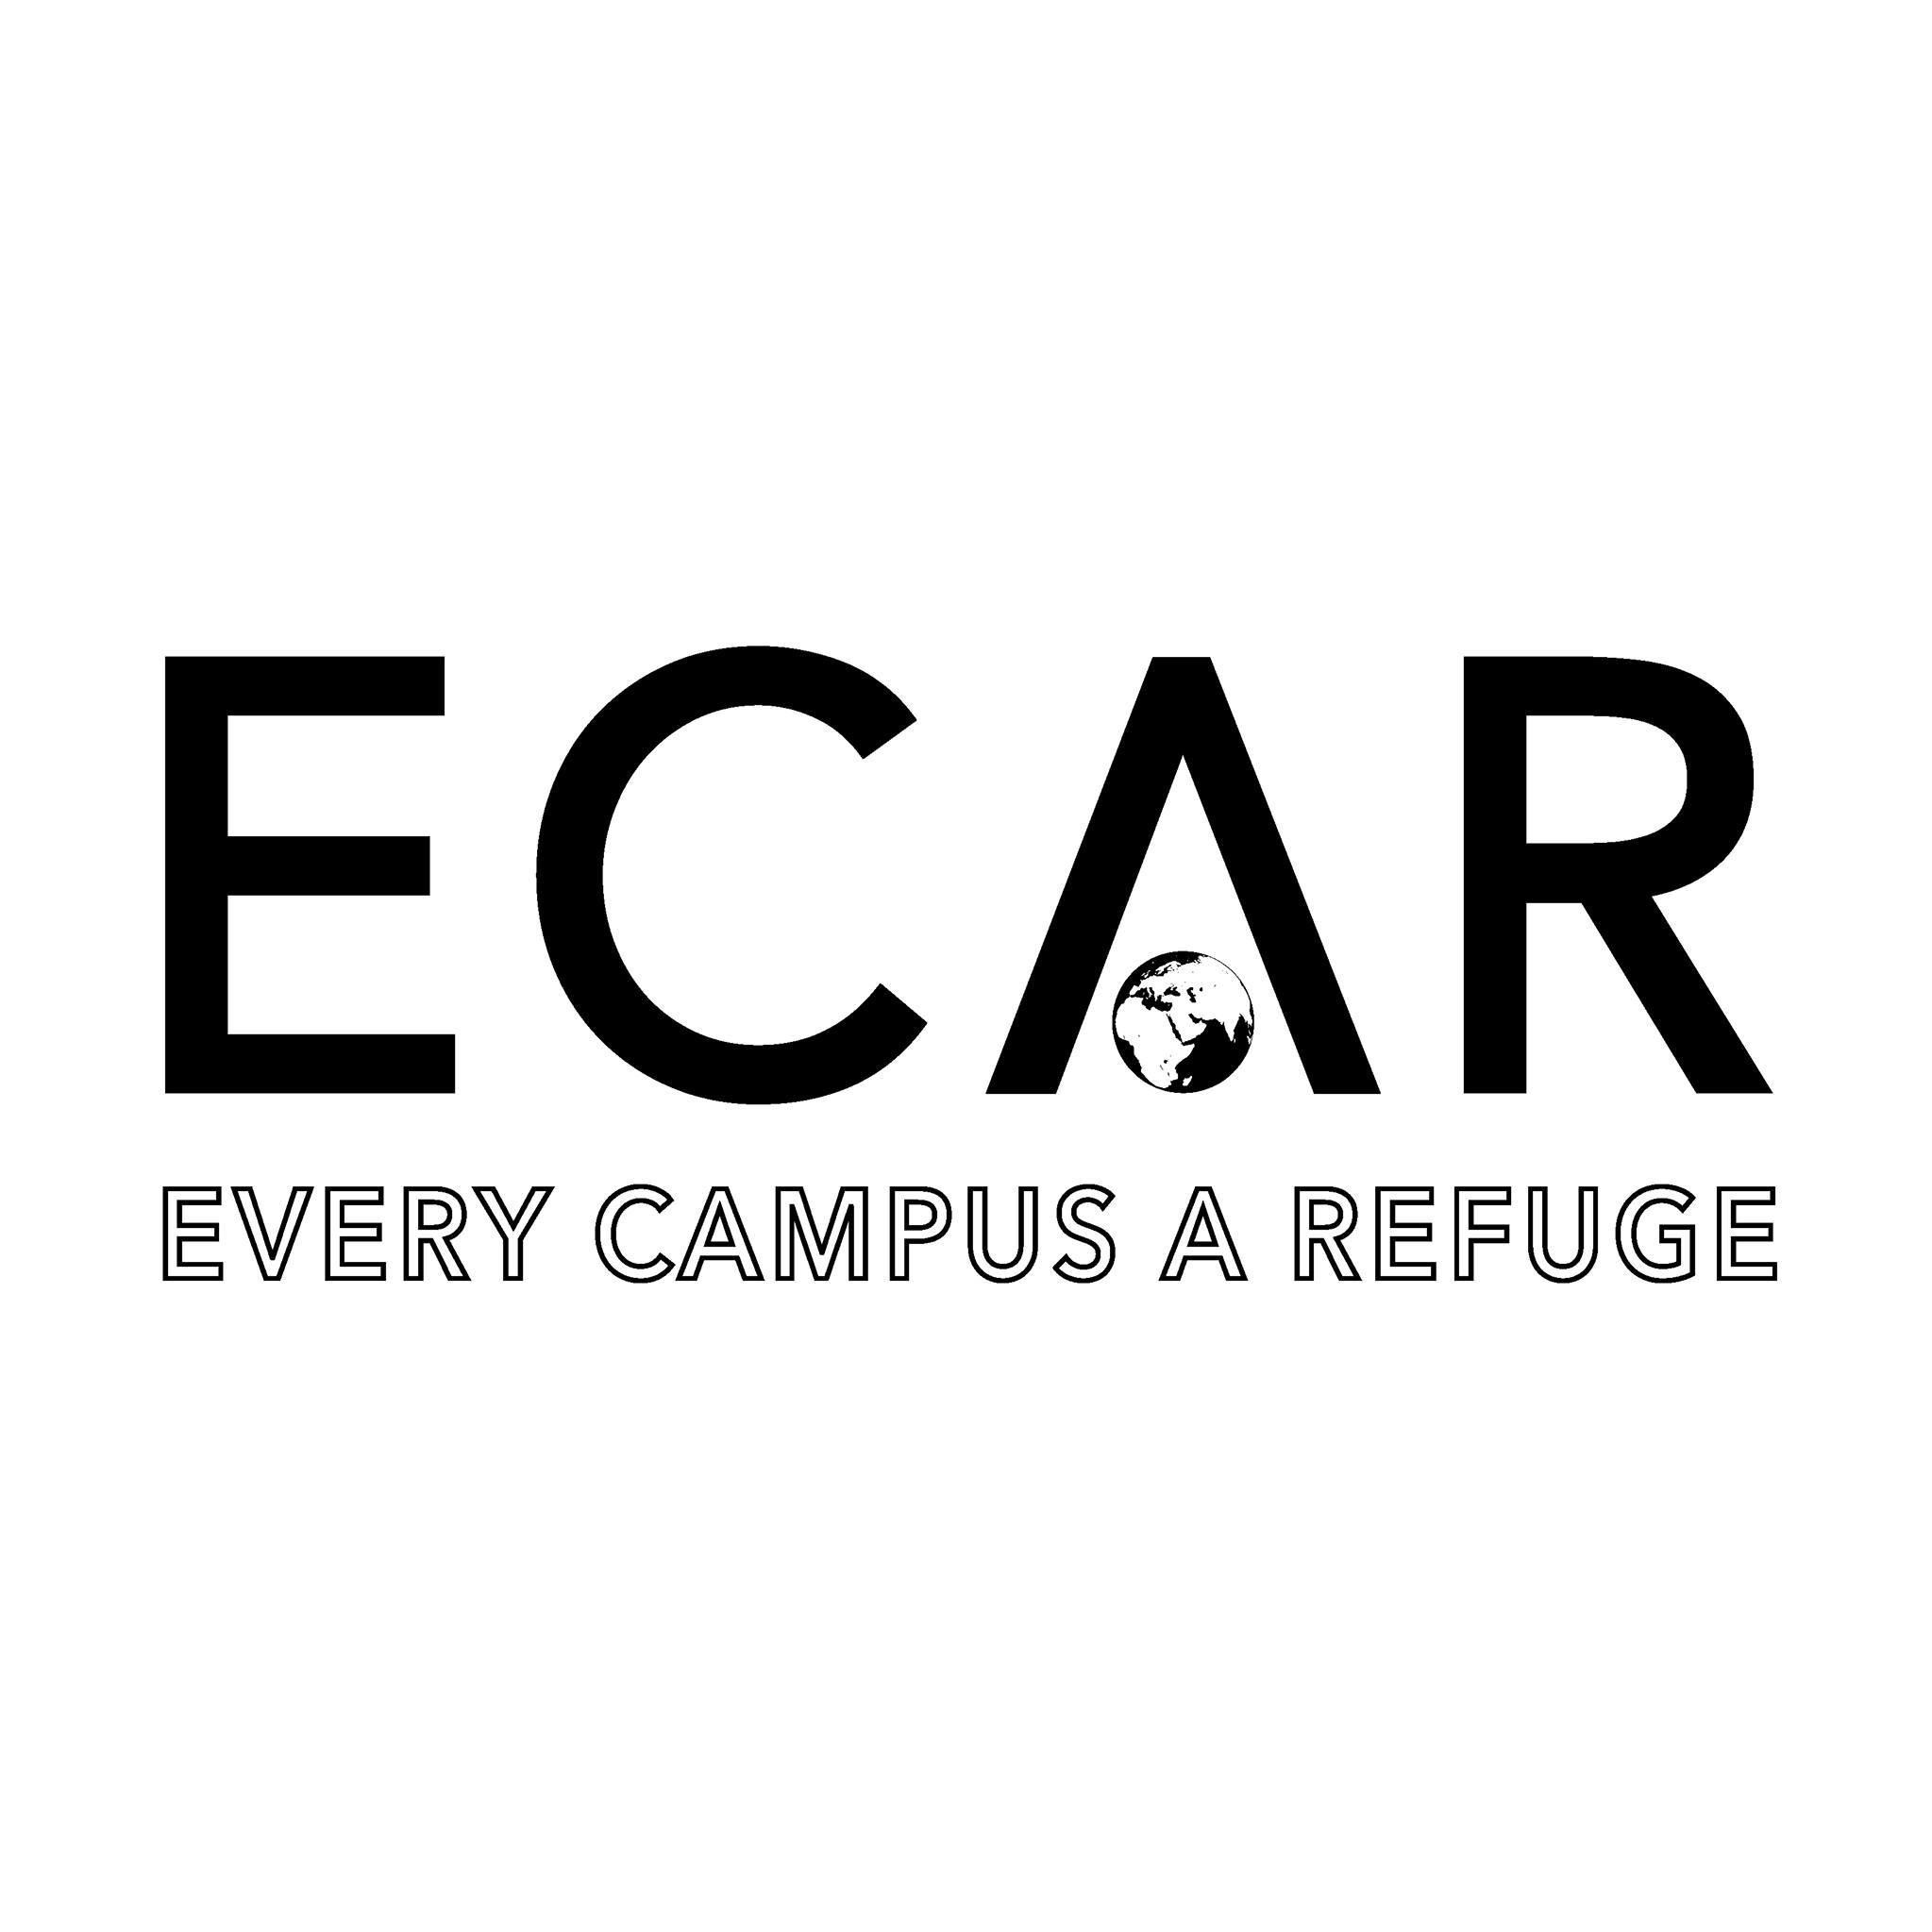 Every Campus A Refuge